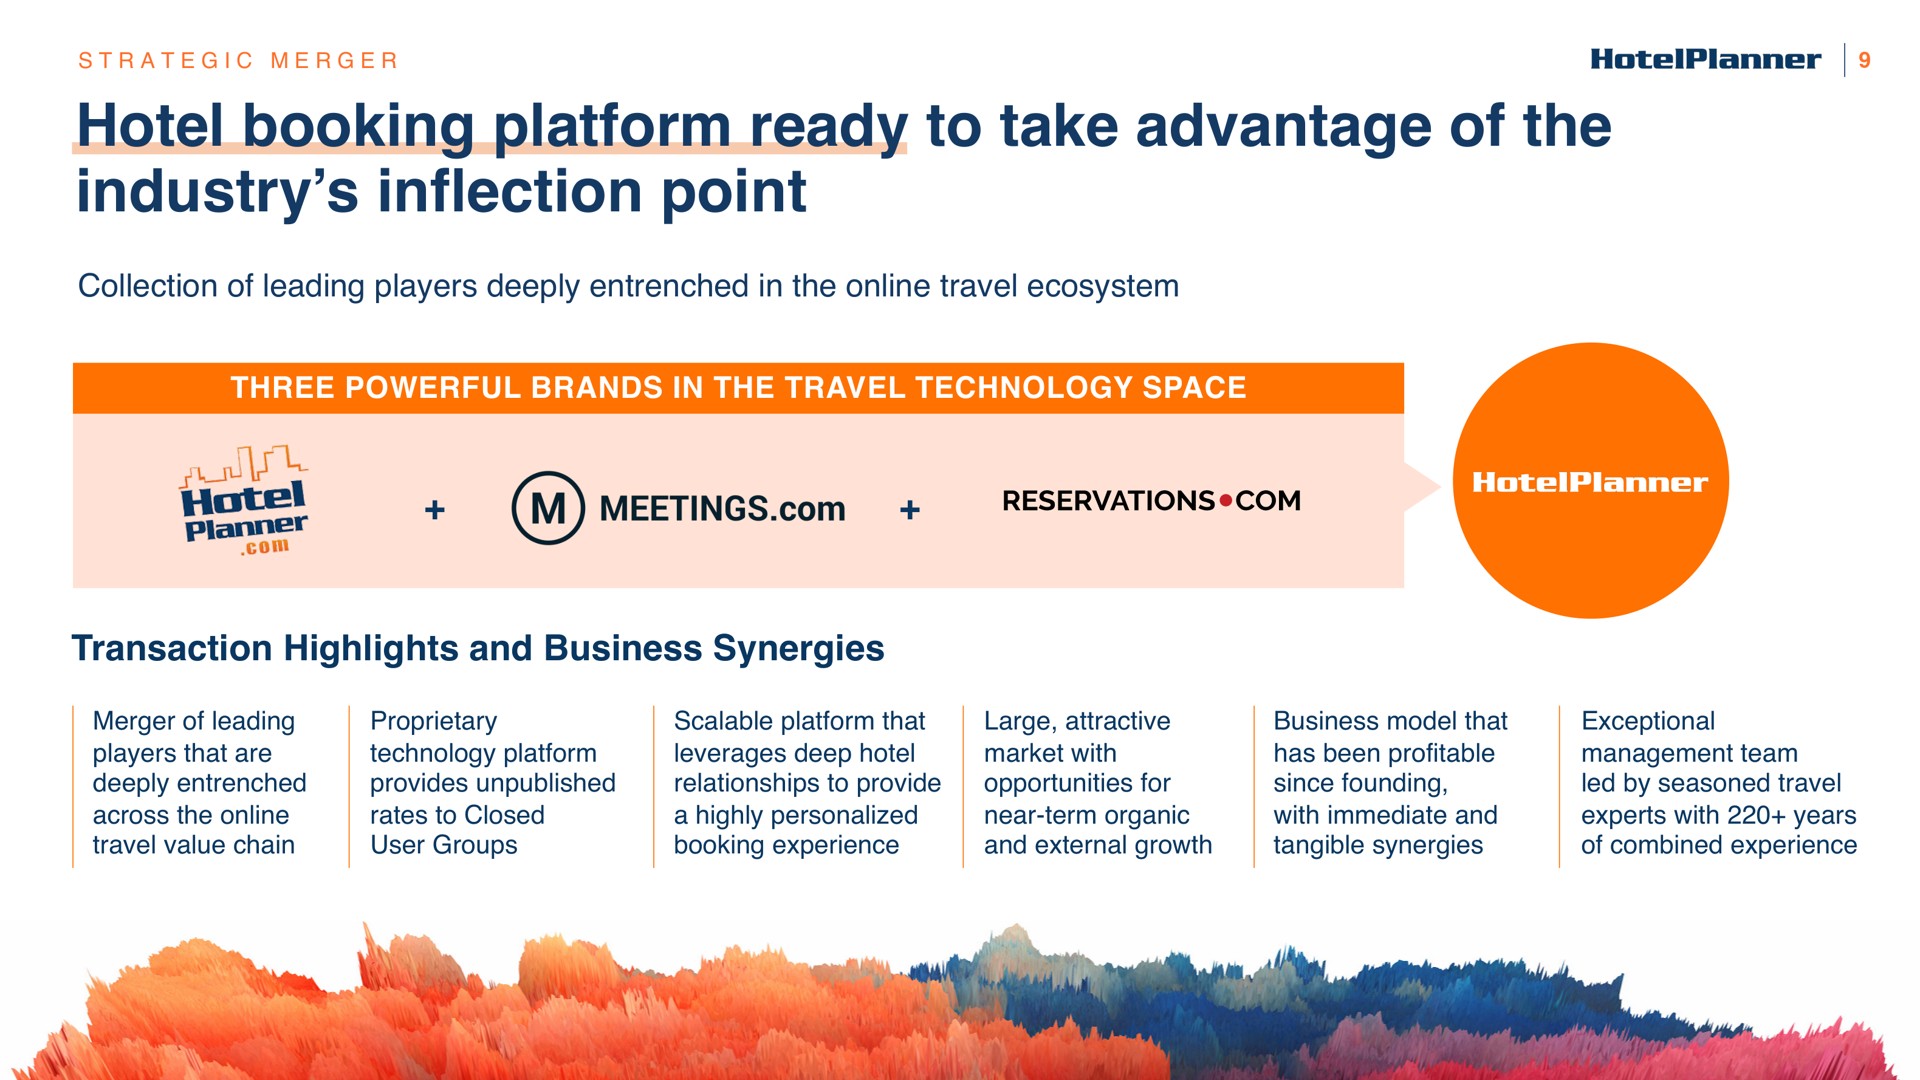 hotel booking platform ready to take advantage of the industry inflection point | HotelPlanner